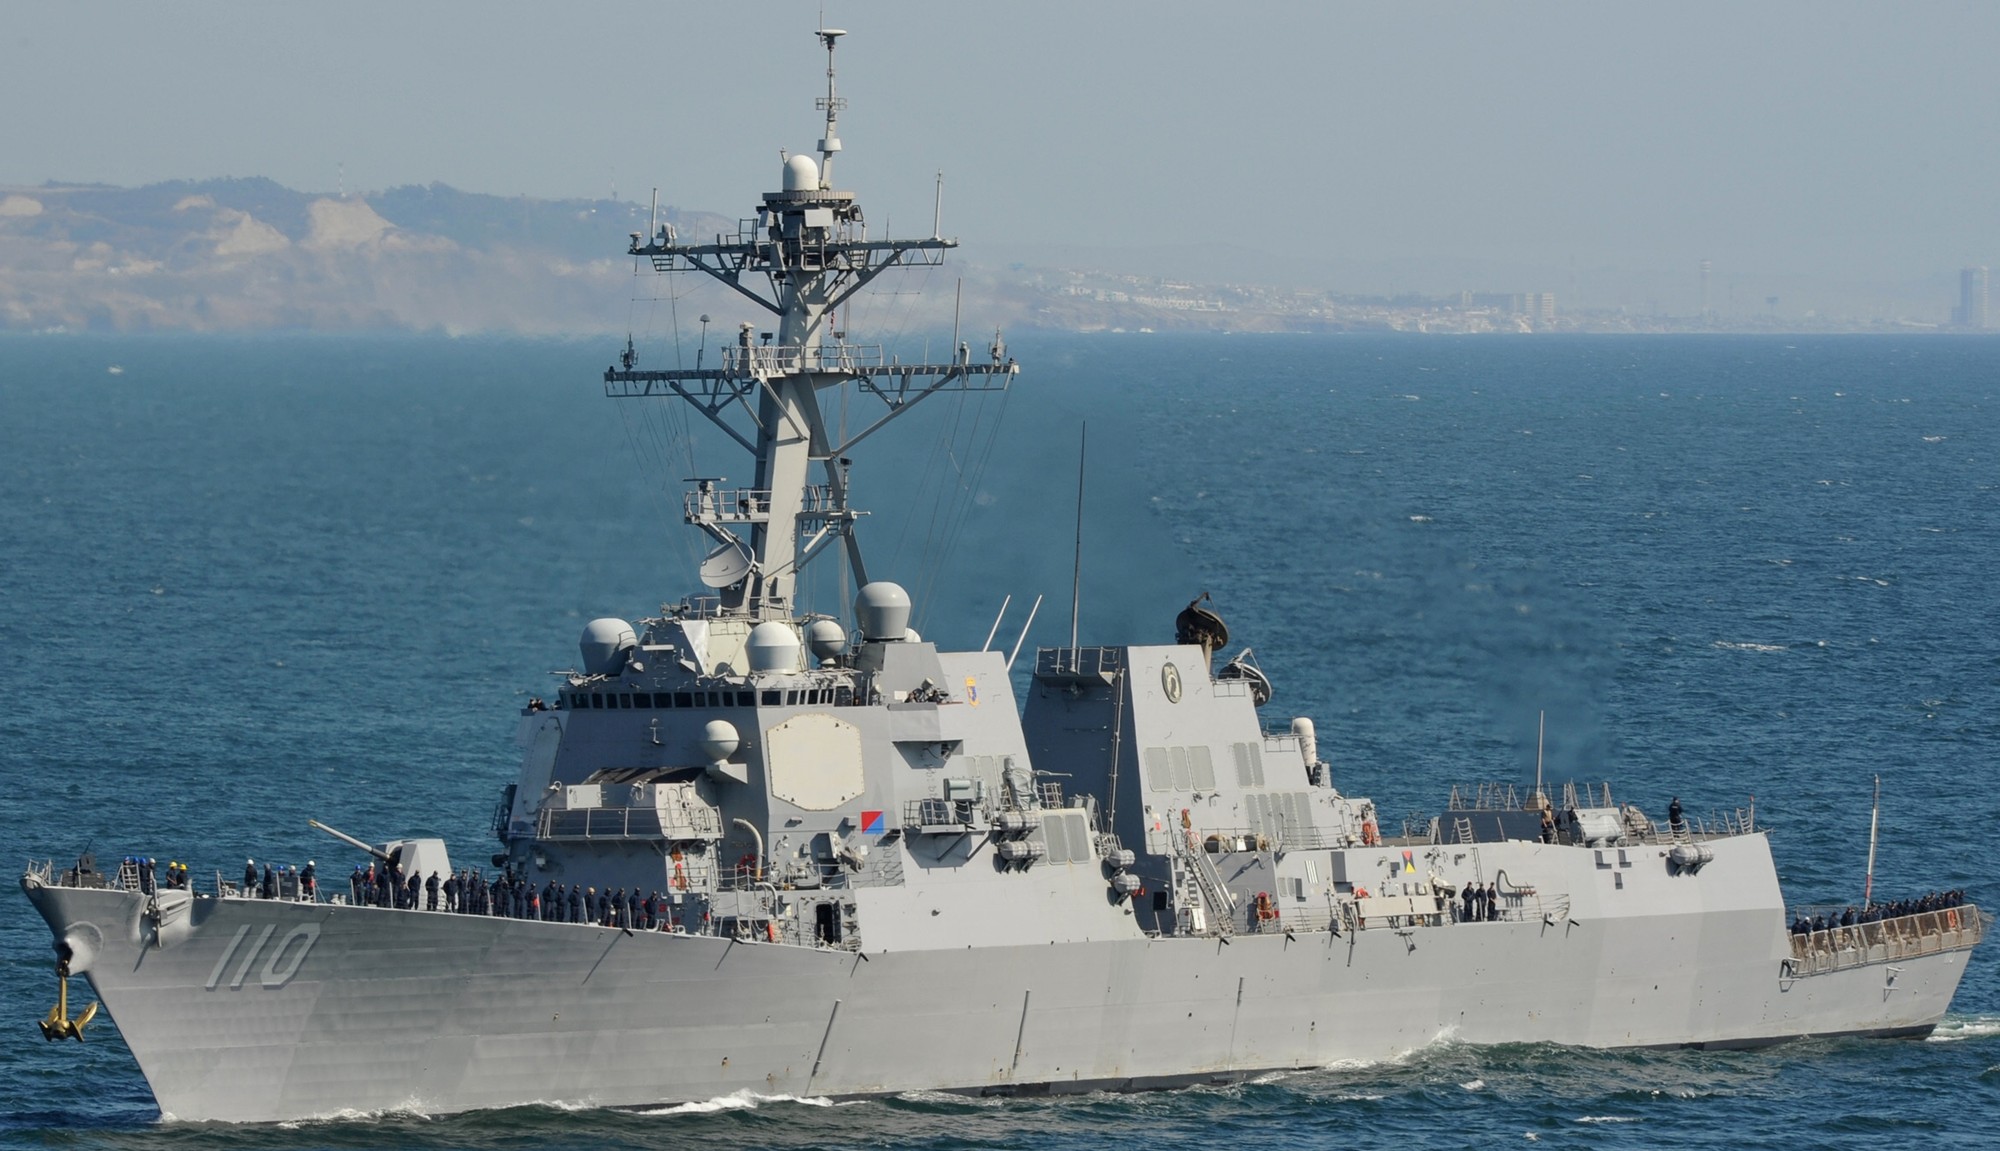 ddg-110 uss william p. lawrence arleigh burke class guided missile destroyer aegis us navy 10